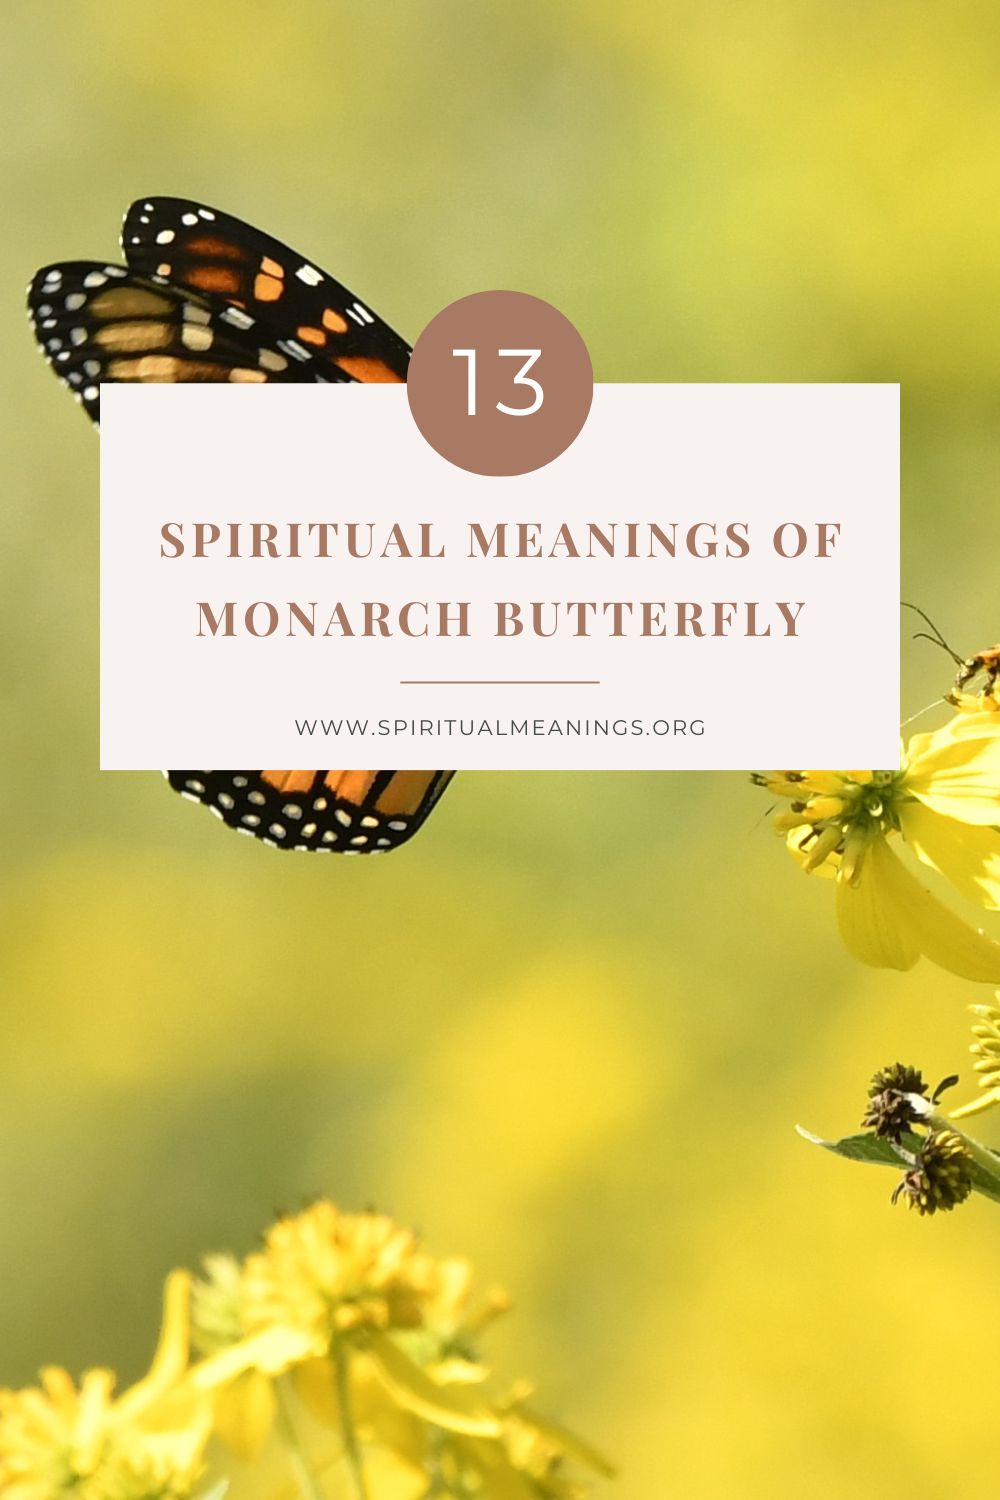 13 Spiritual Meanings of Monarch Butterfly